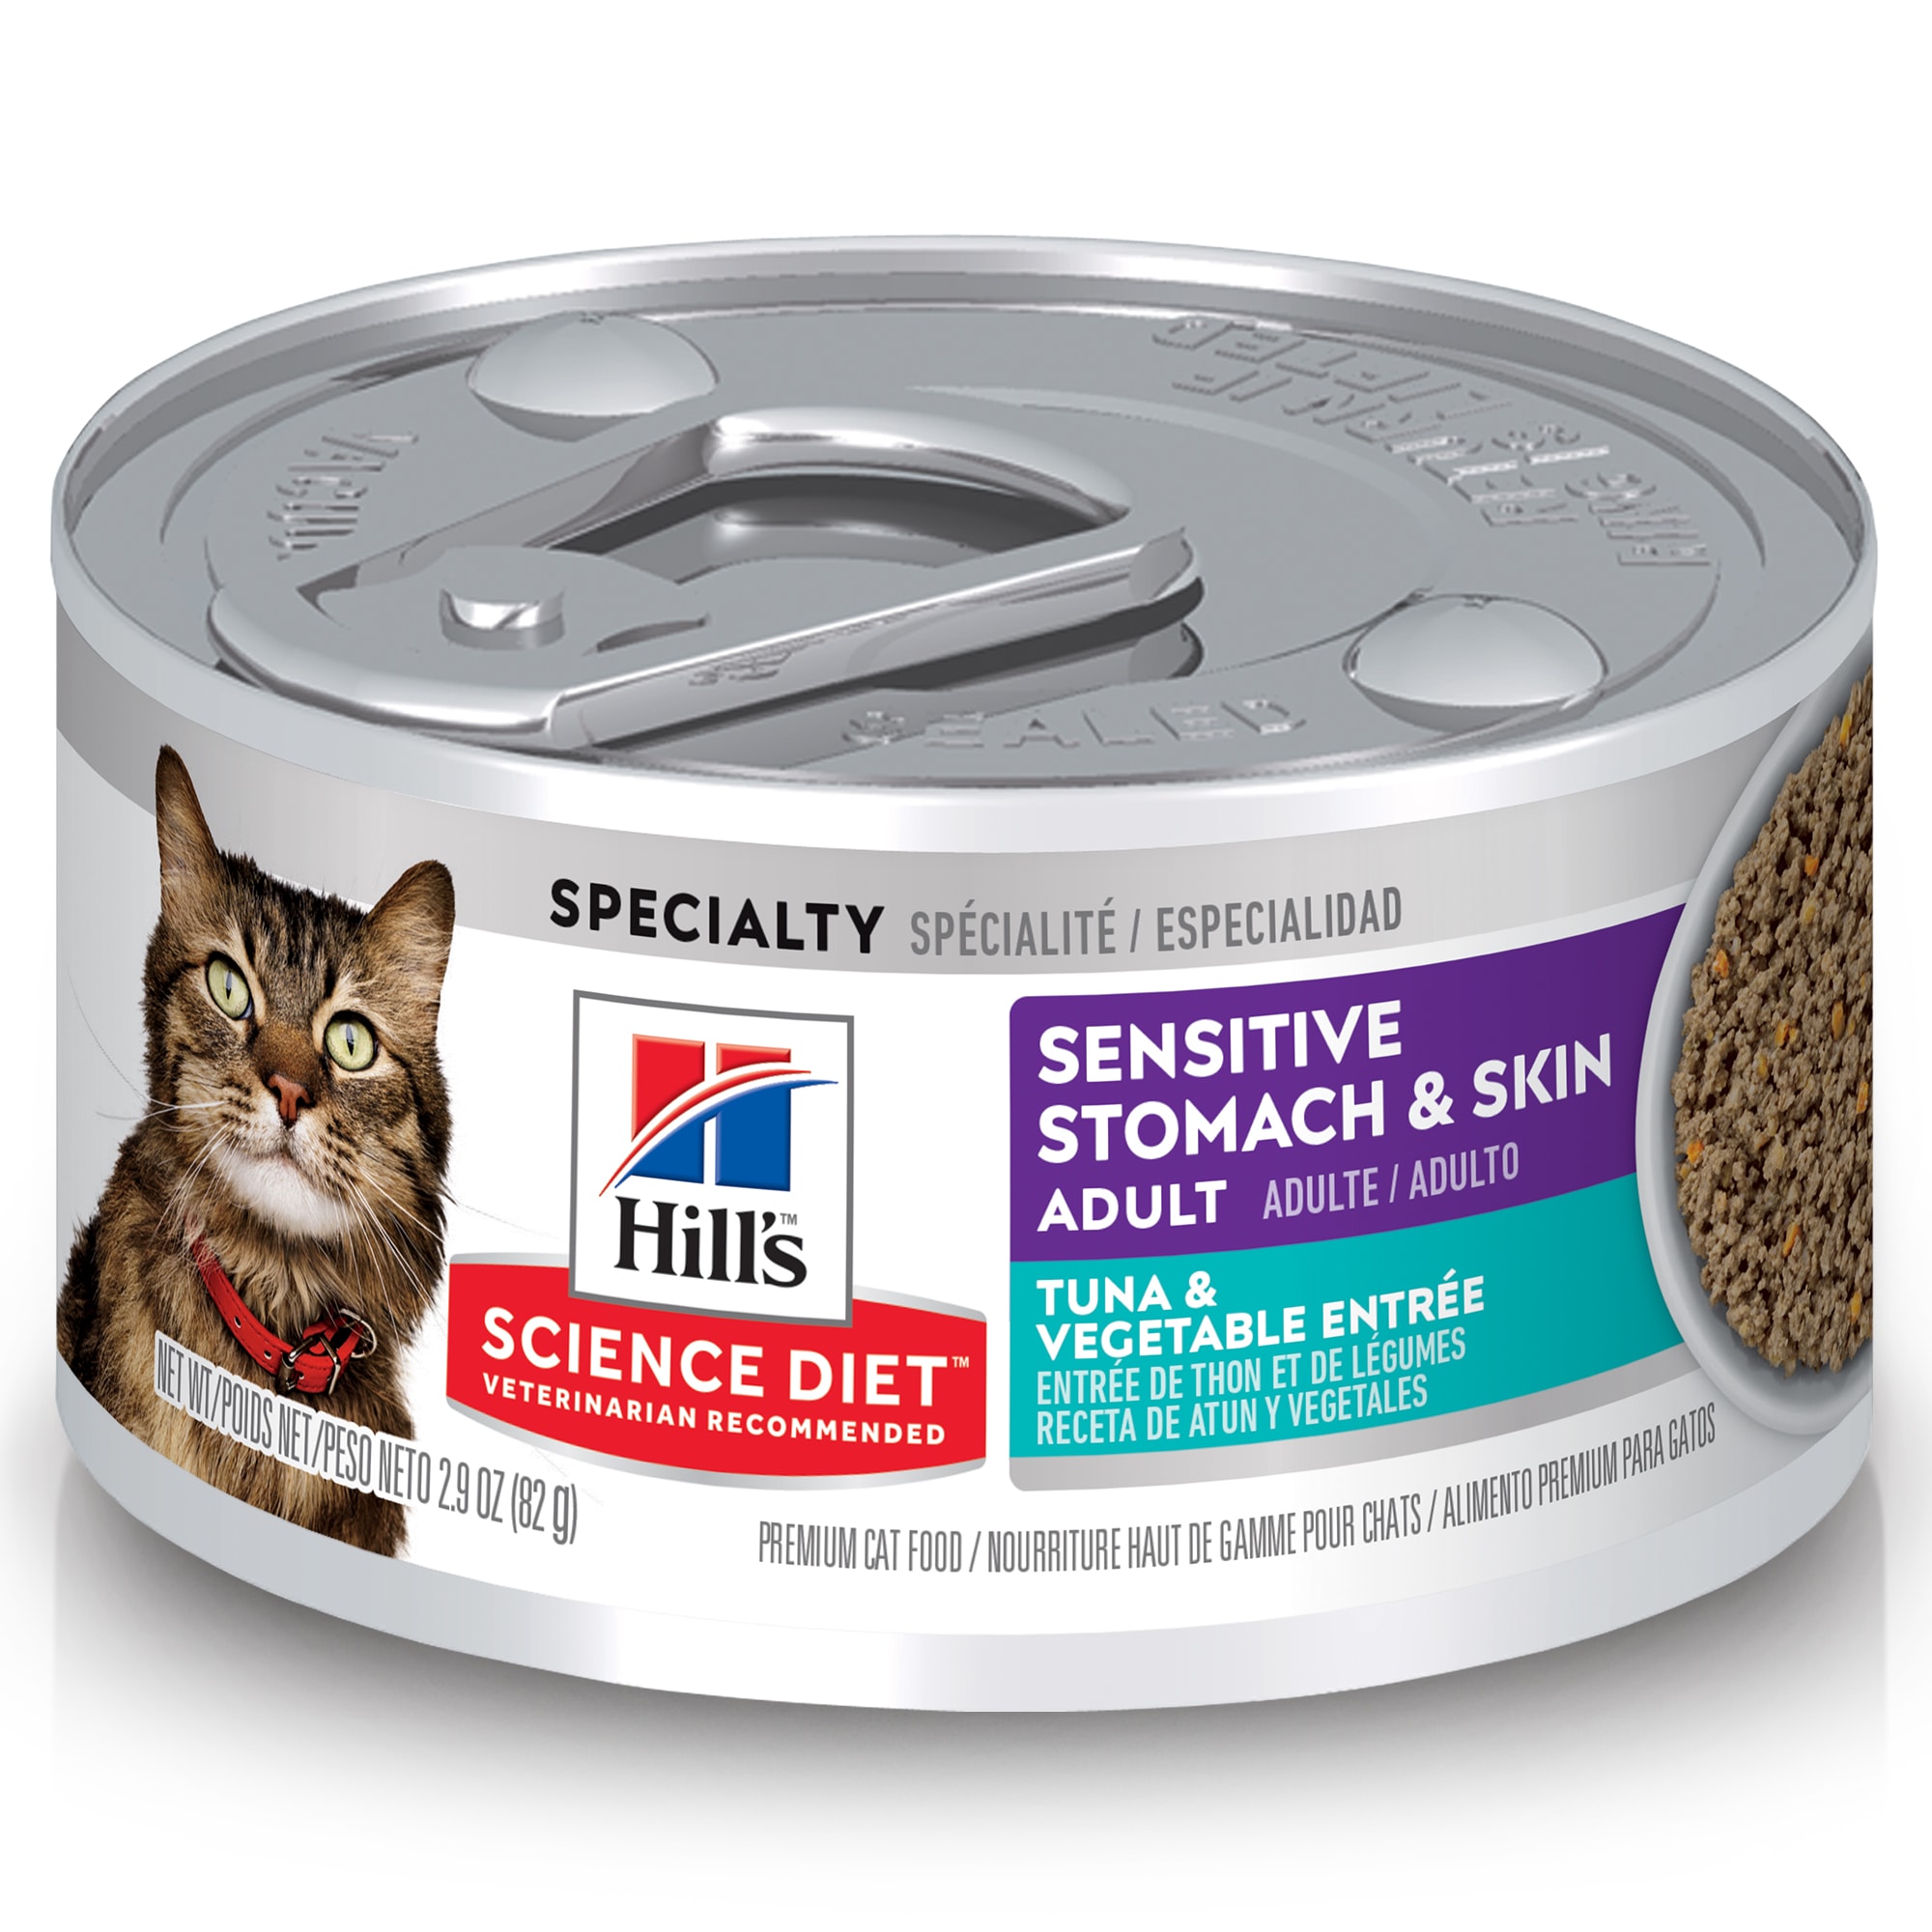 Hill's Science Diet Sensitive Stomach, Skin Tuna & Vegetable Entree